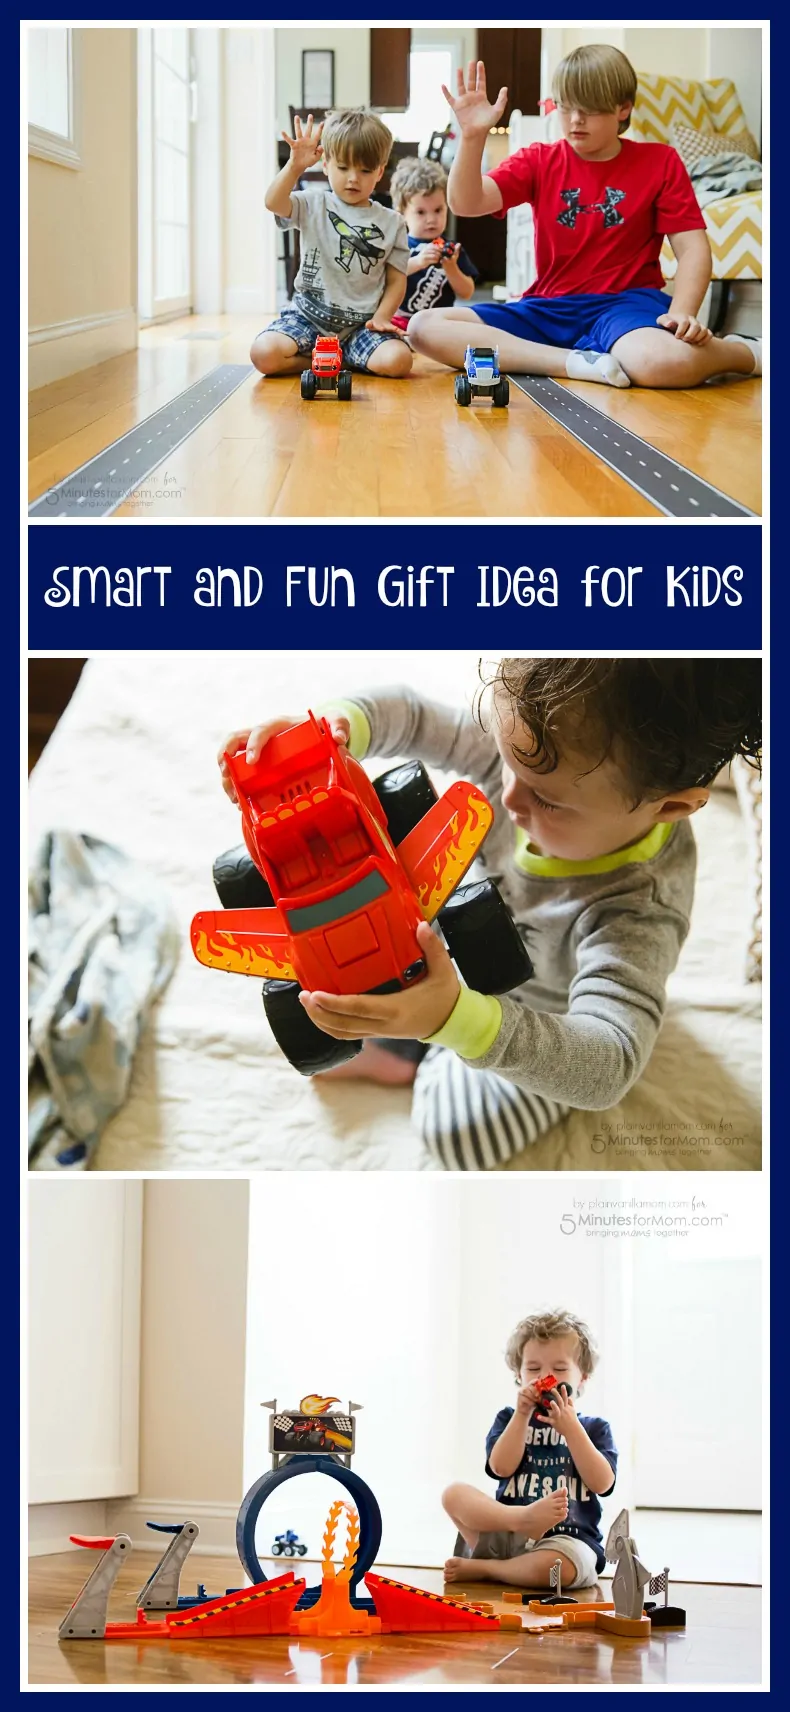 Smart and fun gift idea for kids